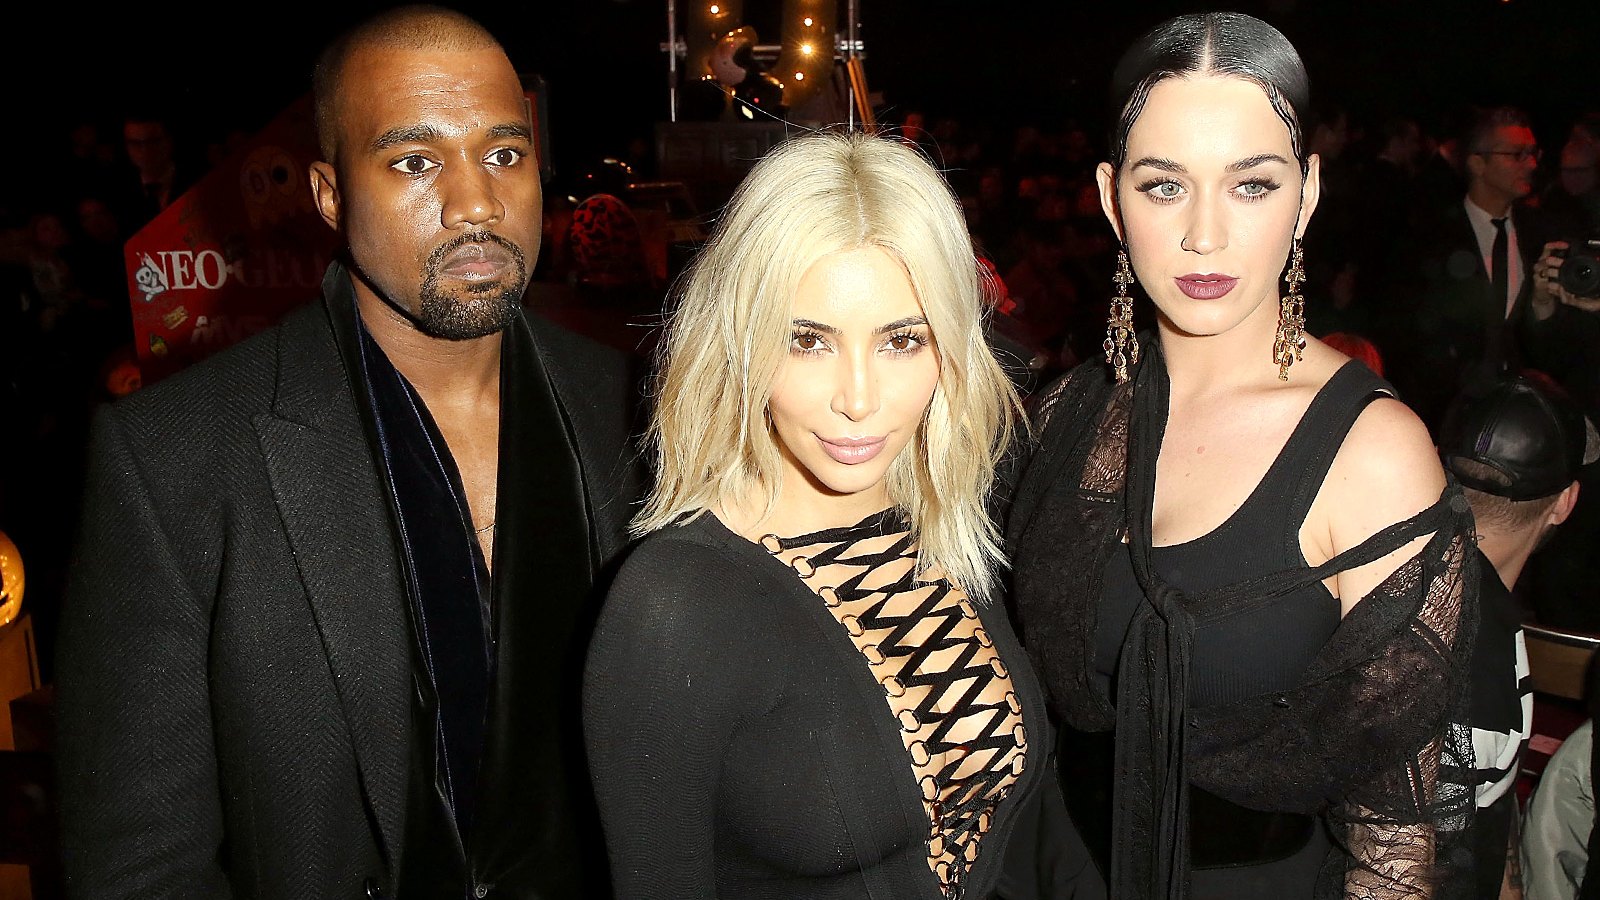 Kanye West, Kim Kardashian and Katy Perry at Givenchy on March 8, 2015